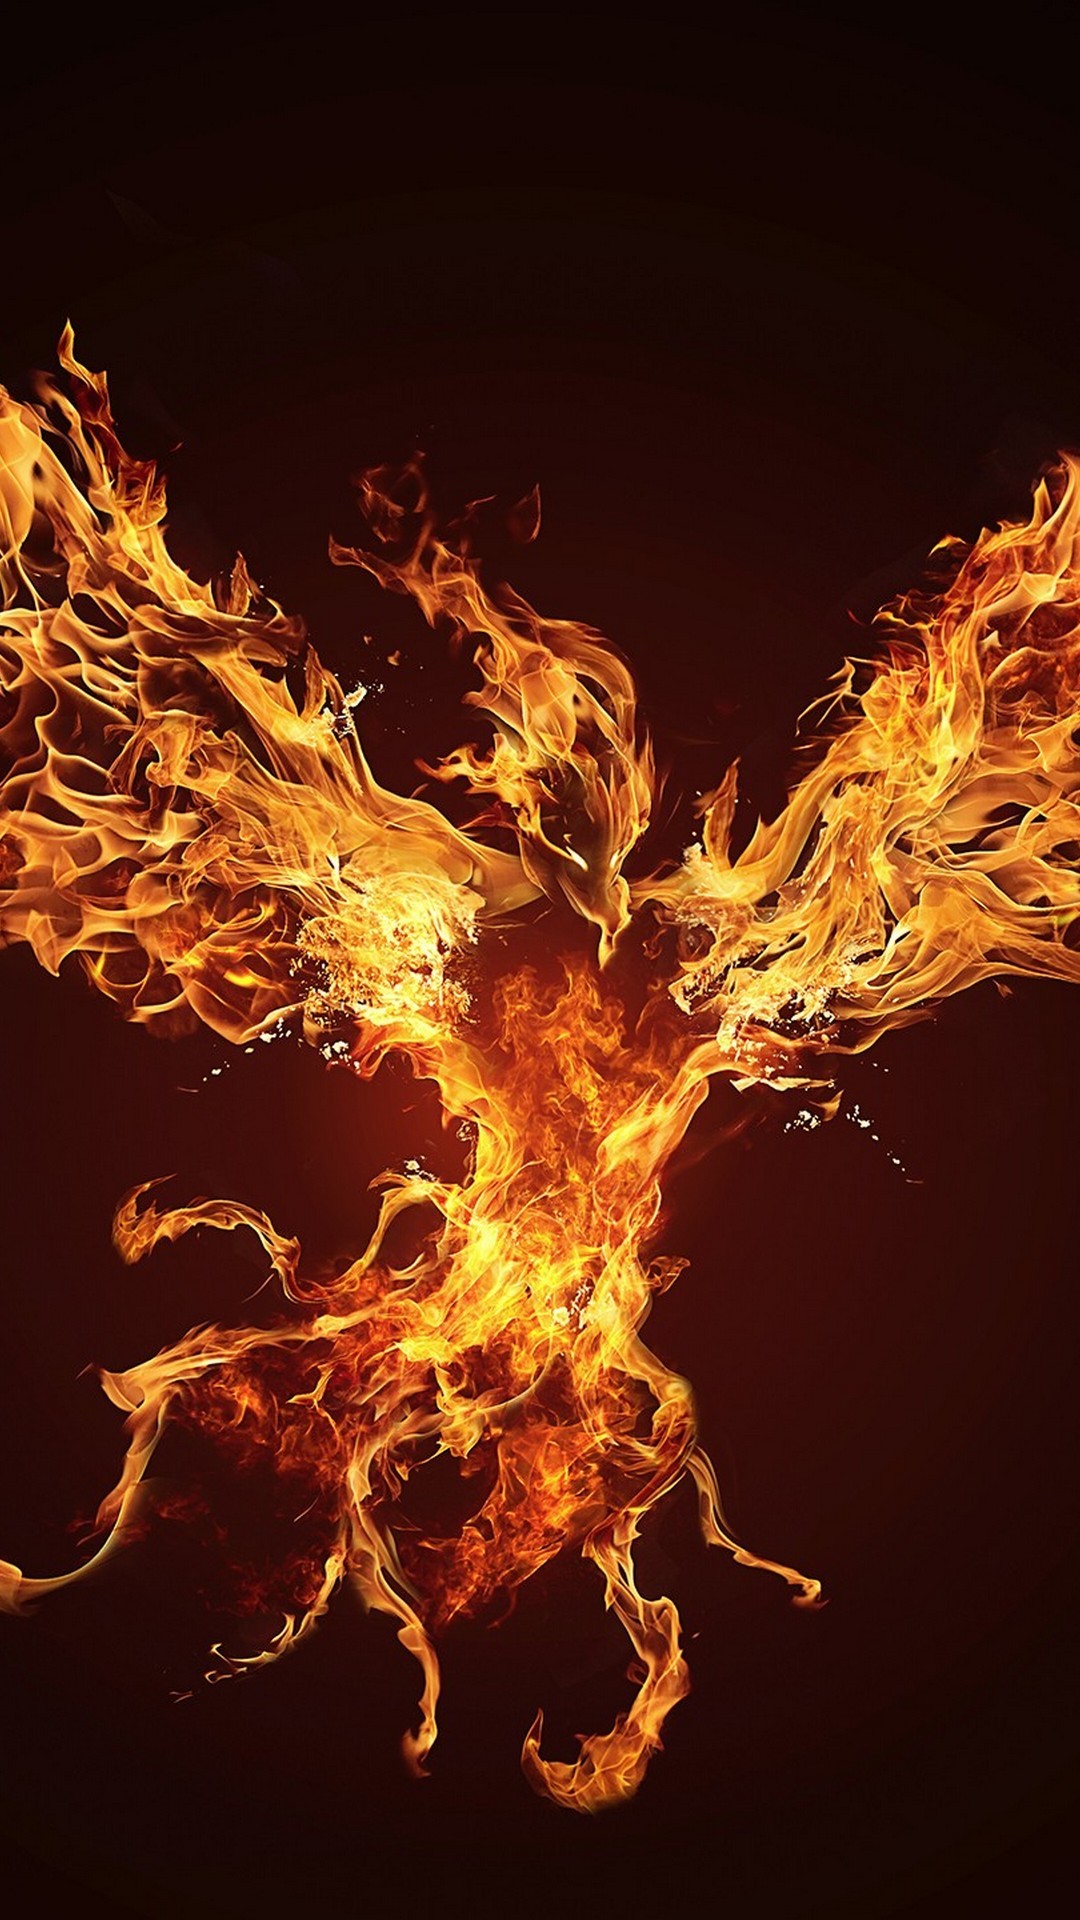 iPhone X Wallpaper Phoenix with resolution 1080X1920 pixel. You can make this wallpaper for your iPhone 5, 6, 7, 8, X backgrounds, Mobile Screensaver, or iPad Lock Screen